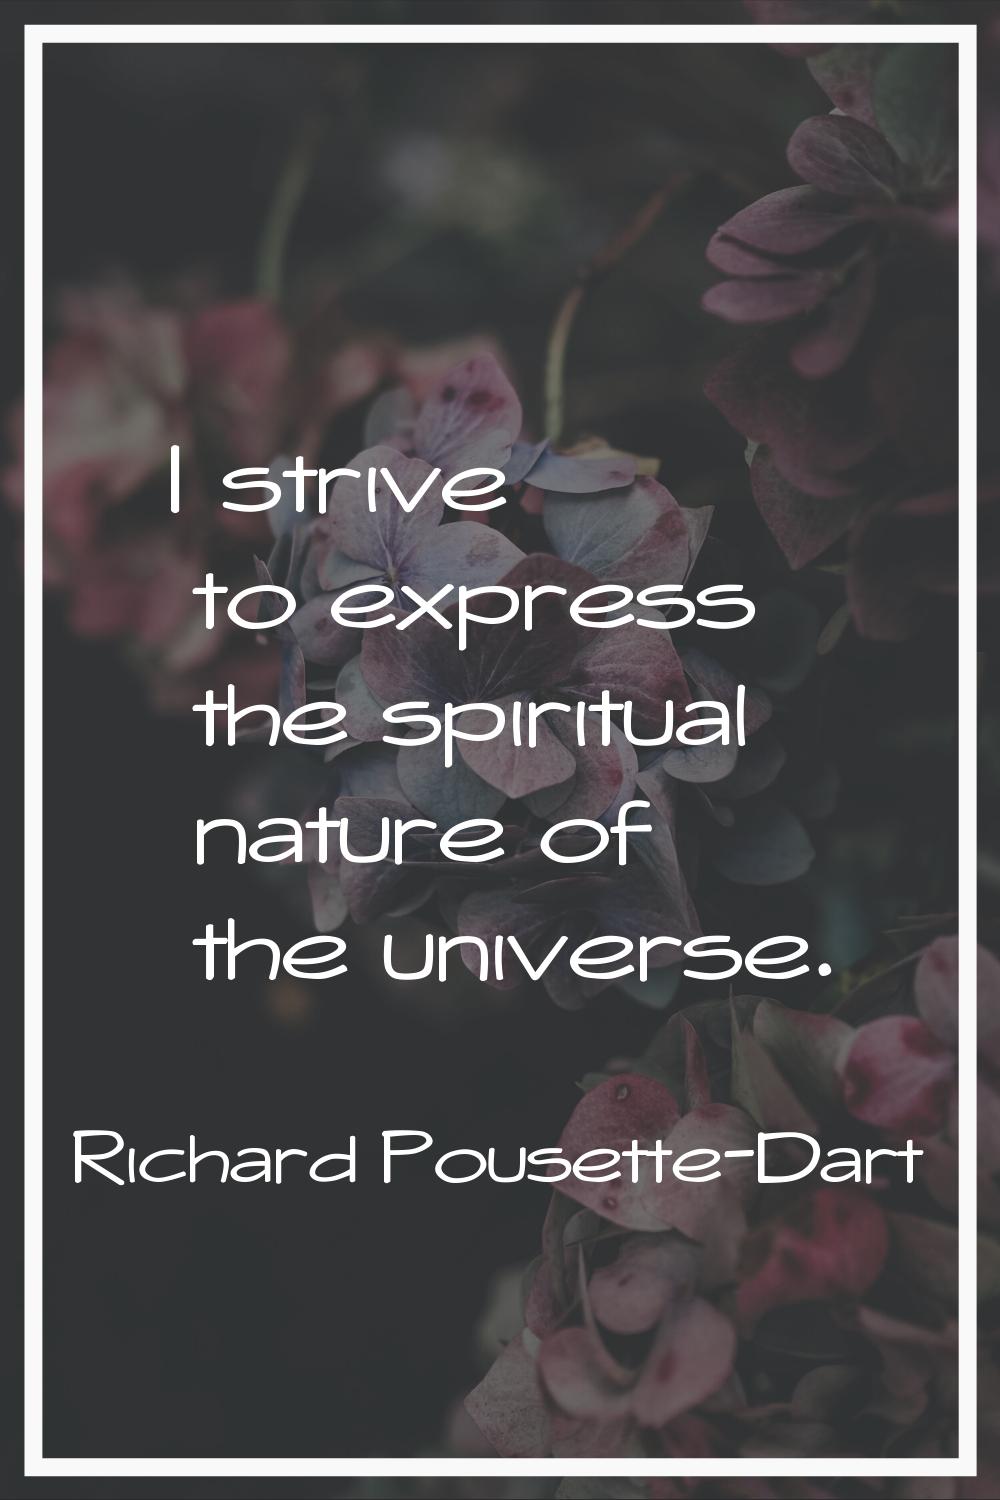 I strive to express the spiritual nature of the universe.